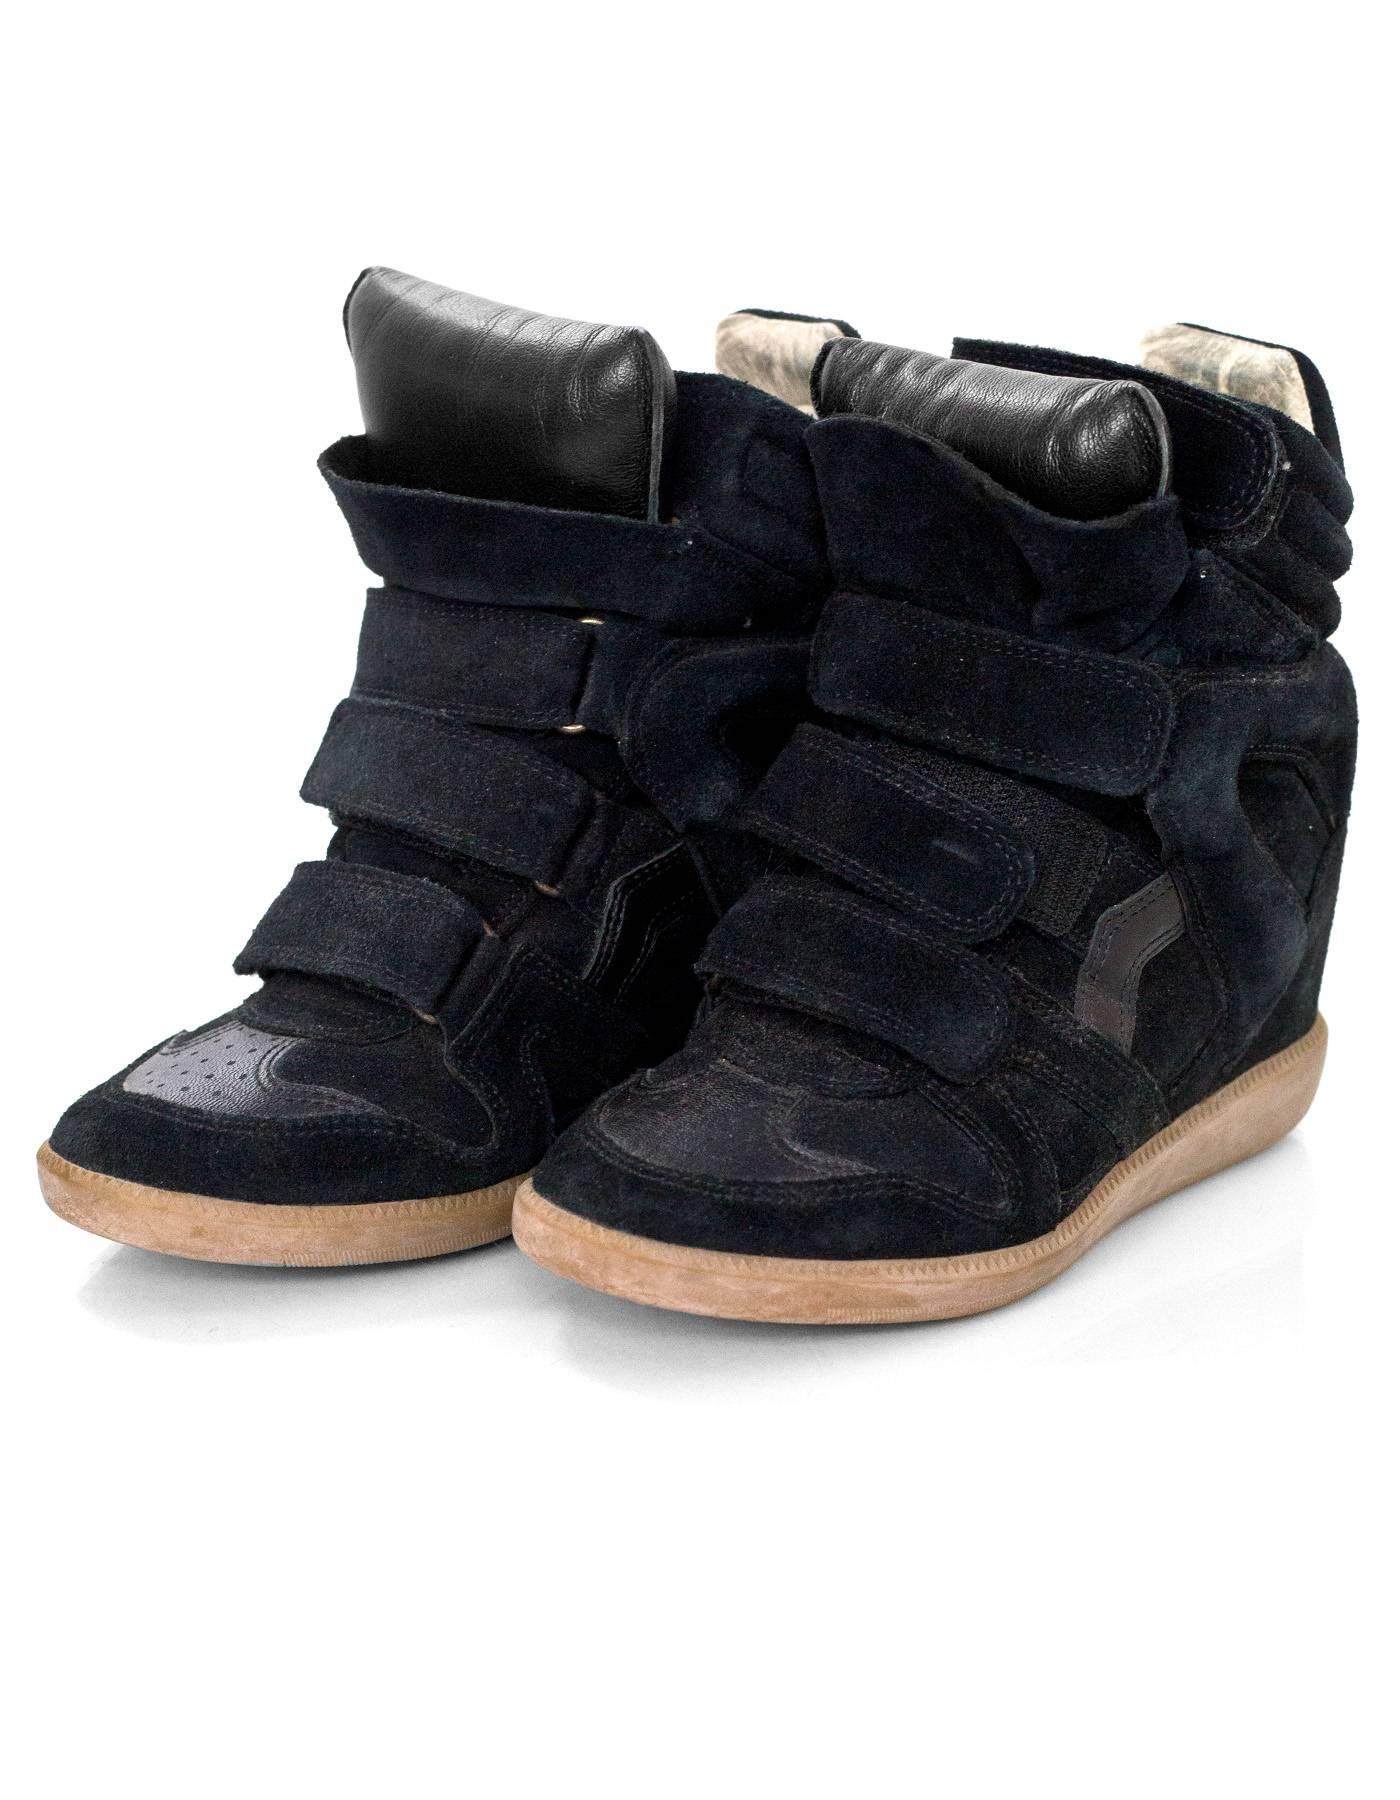 Isabel Marant Black Beckett Suede Wedge Sneakers Sz 36

Made In: Portugal
Color: Black
Materials: Suede, leather
Closure/Opening: Velcro closures
Sole Stamp: Isabel Marant 36
Overall Condition: Very good pre-owned condition with the exception of